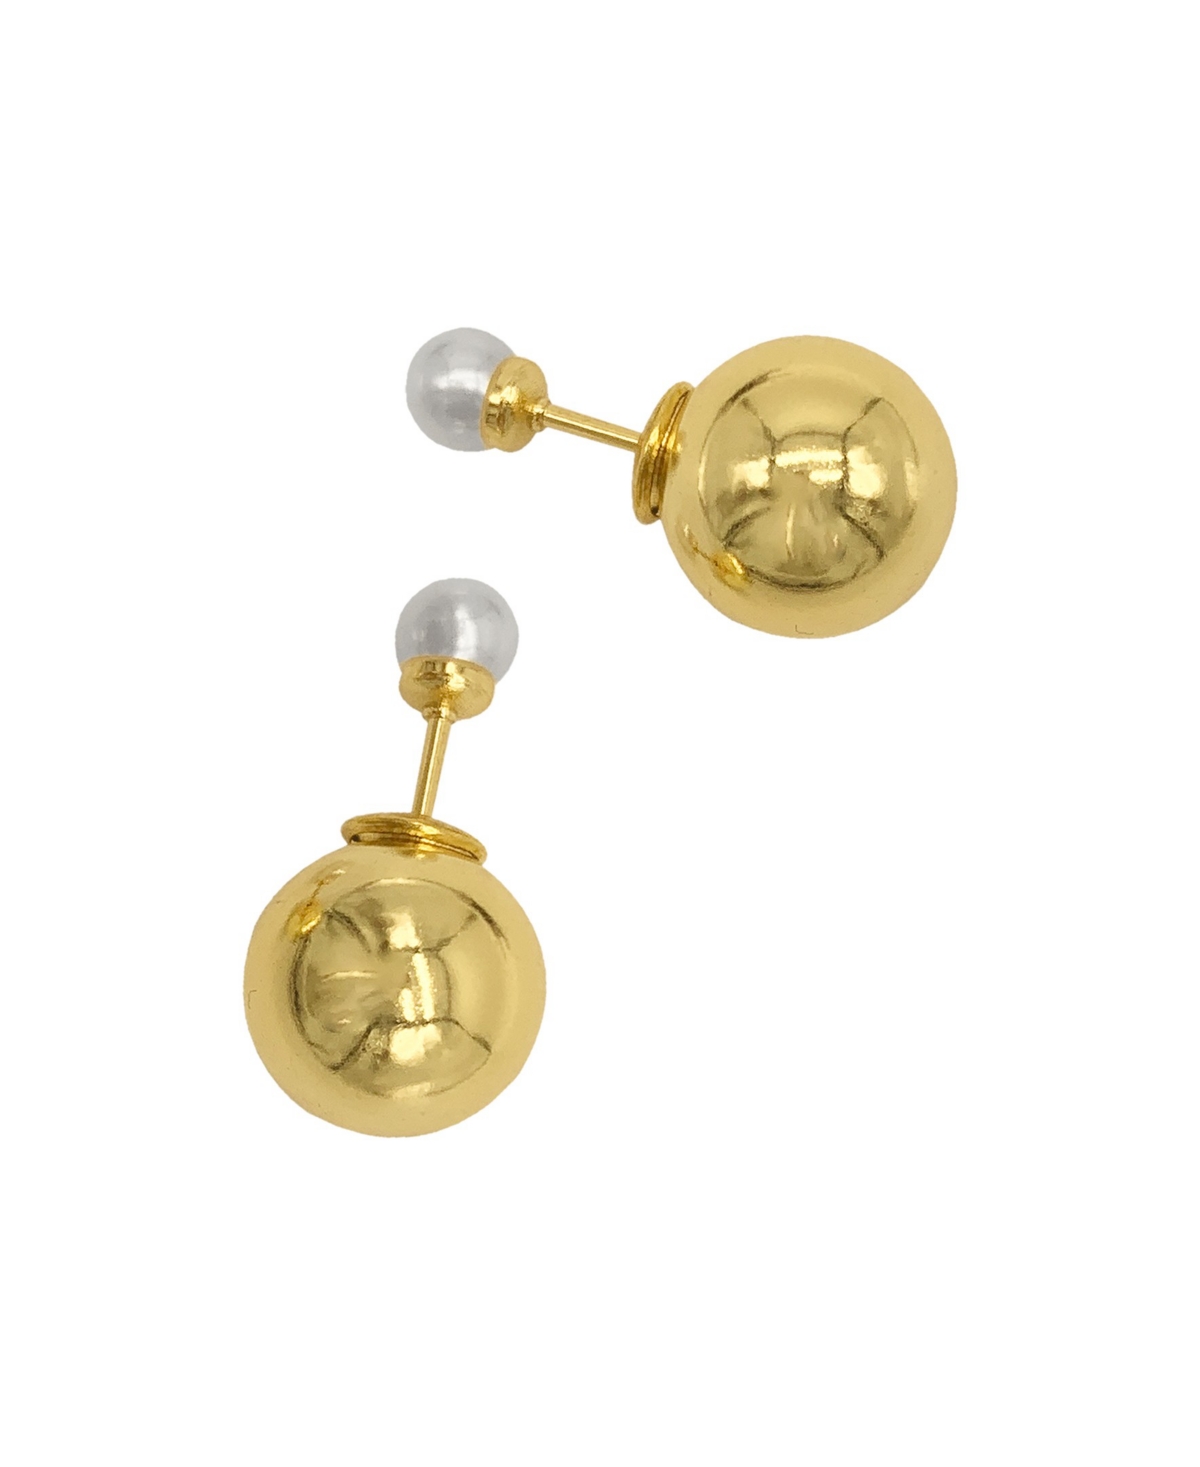 Gold Imitation Pearl Double-Sided Ball Earrings - White